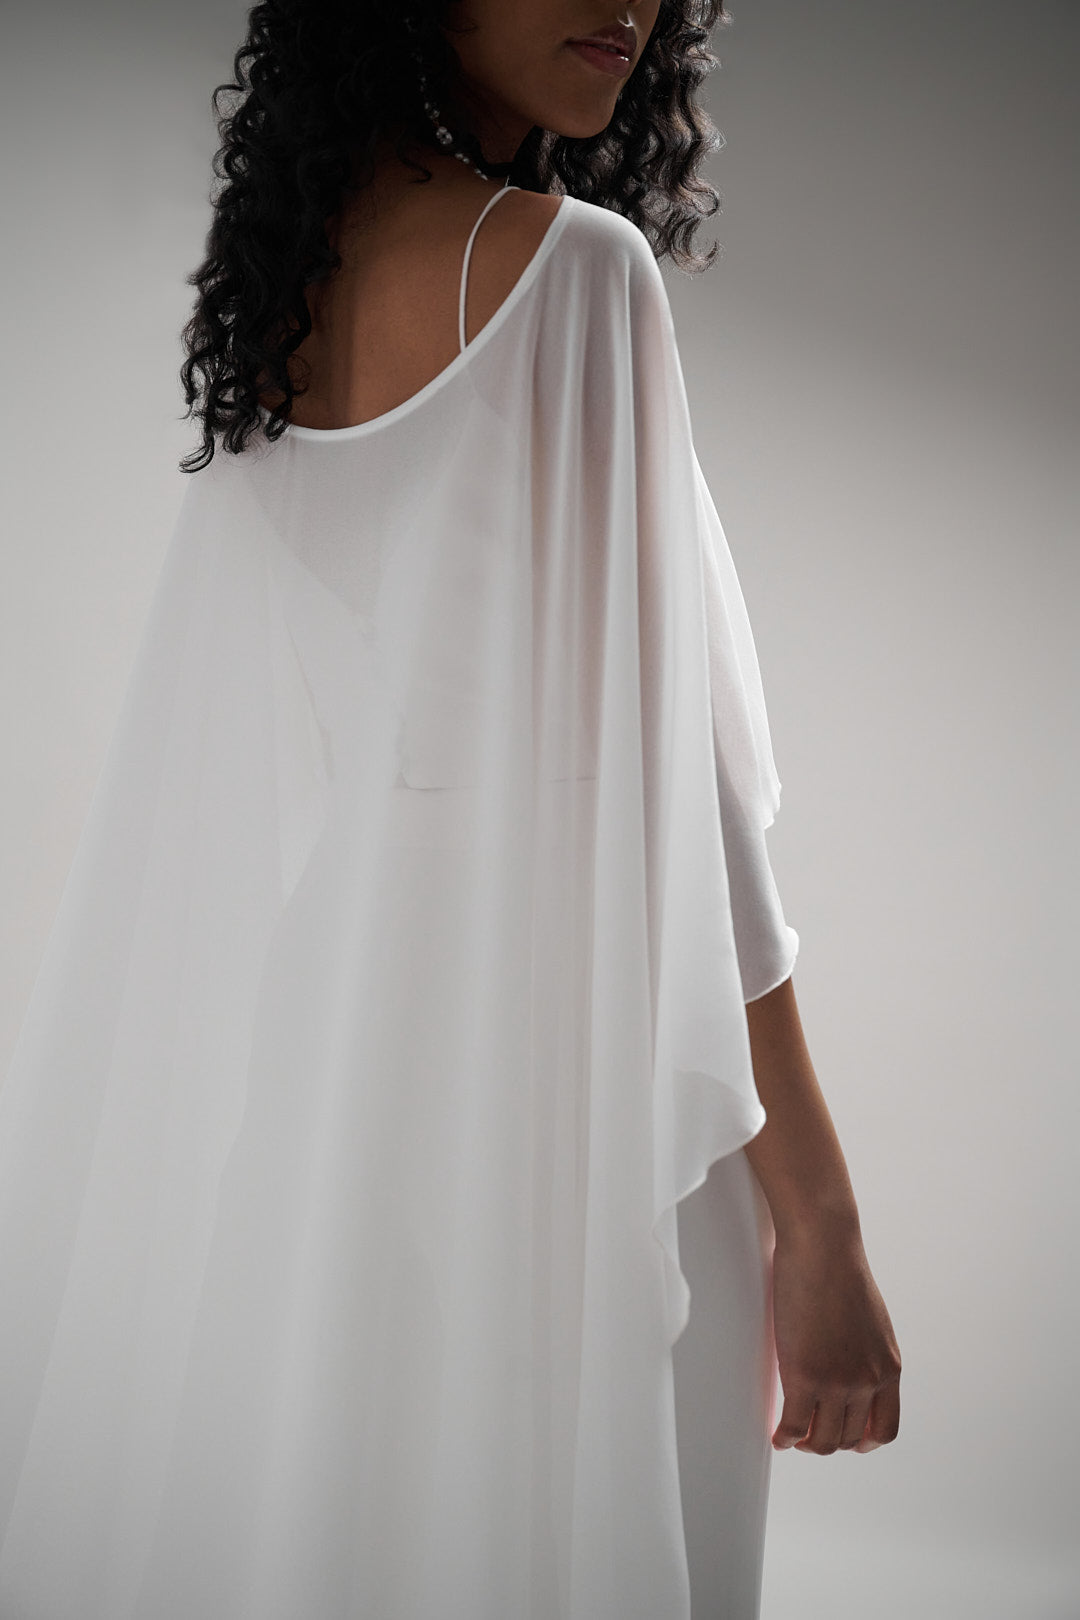 A model wears the Beatrix Cape, a chiffon cape that offers dramatic flair for the fearless bride. The cape is a perfect veil alternative for those with bold style and editorial tastes, with its light, airy fabric that moves with you to create an air of whimsical elegance